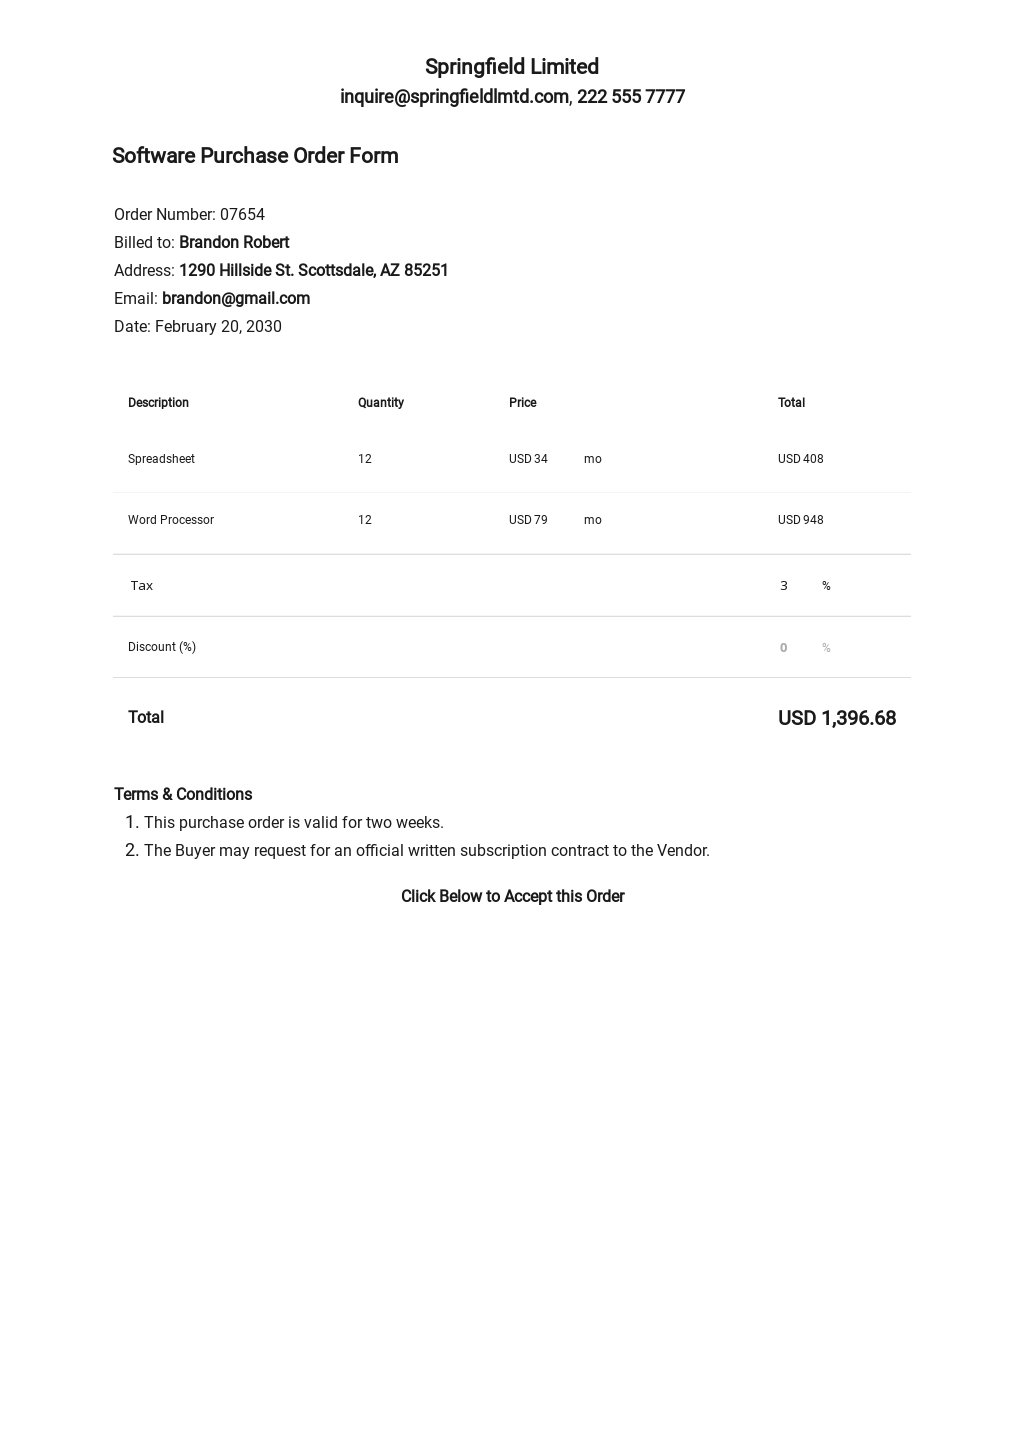 Software Purchase Order Form Template.jpe